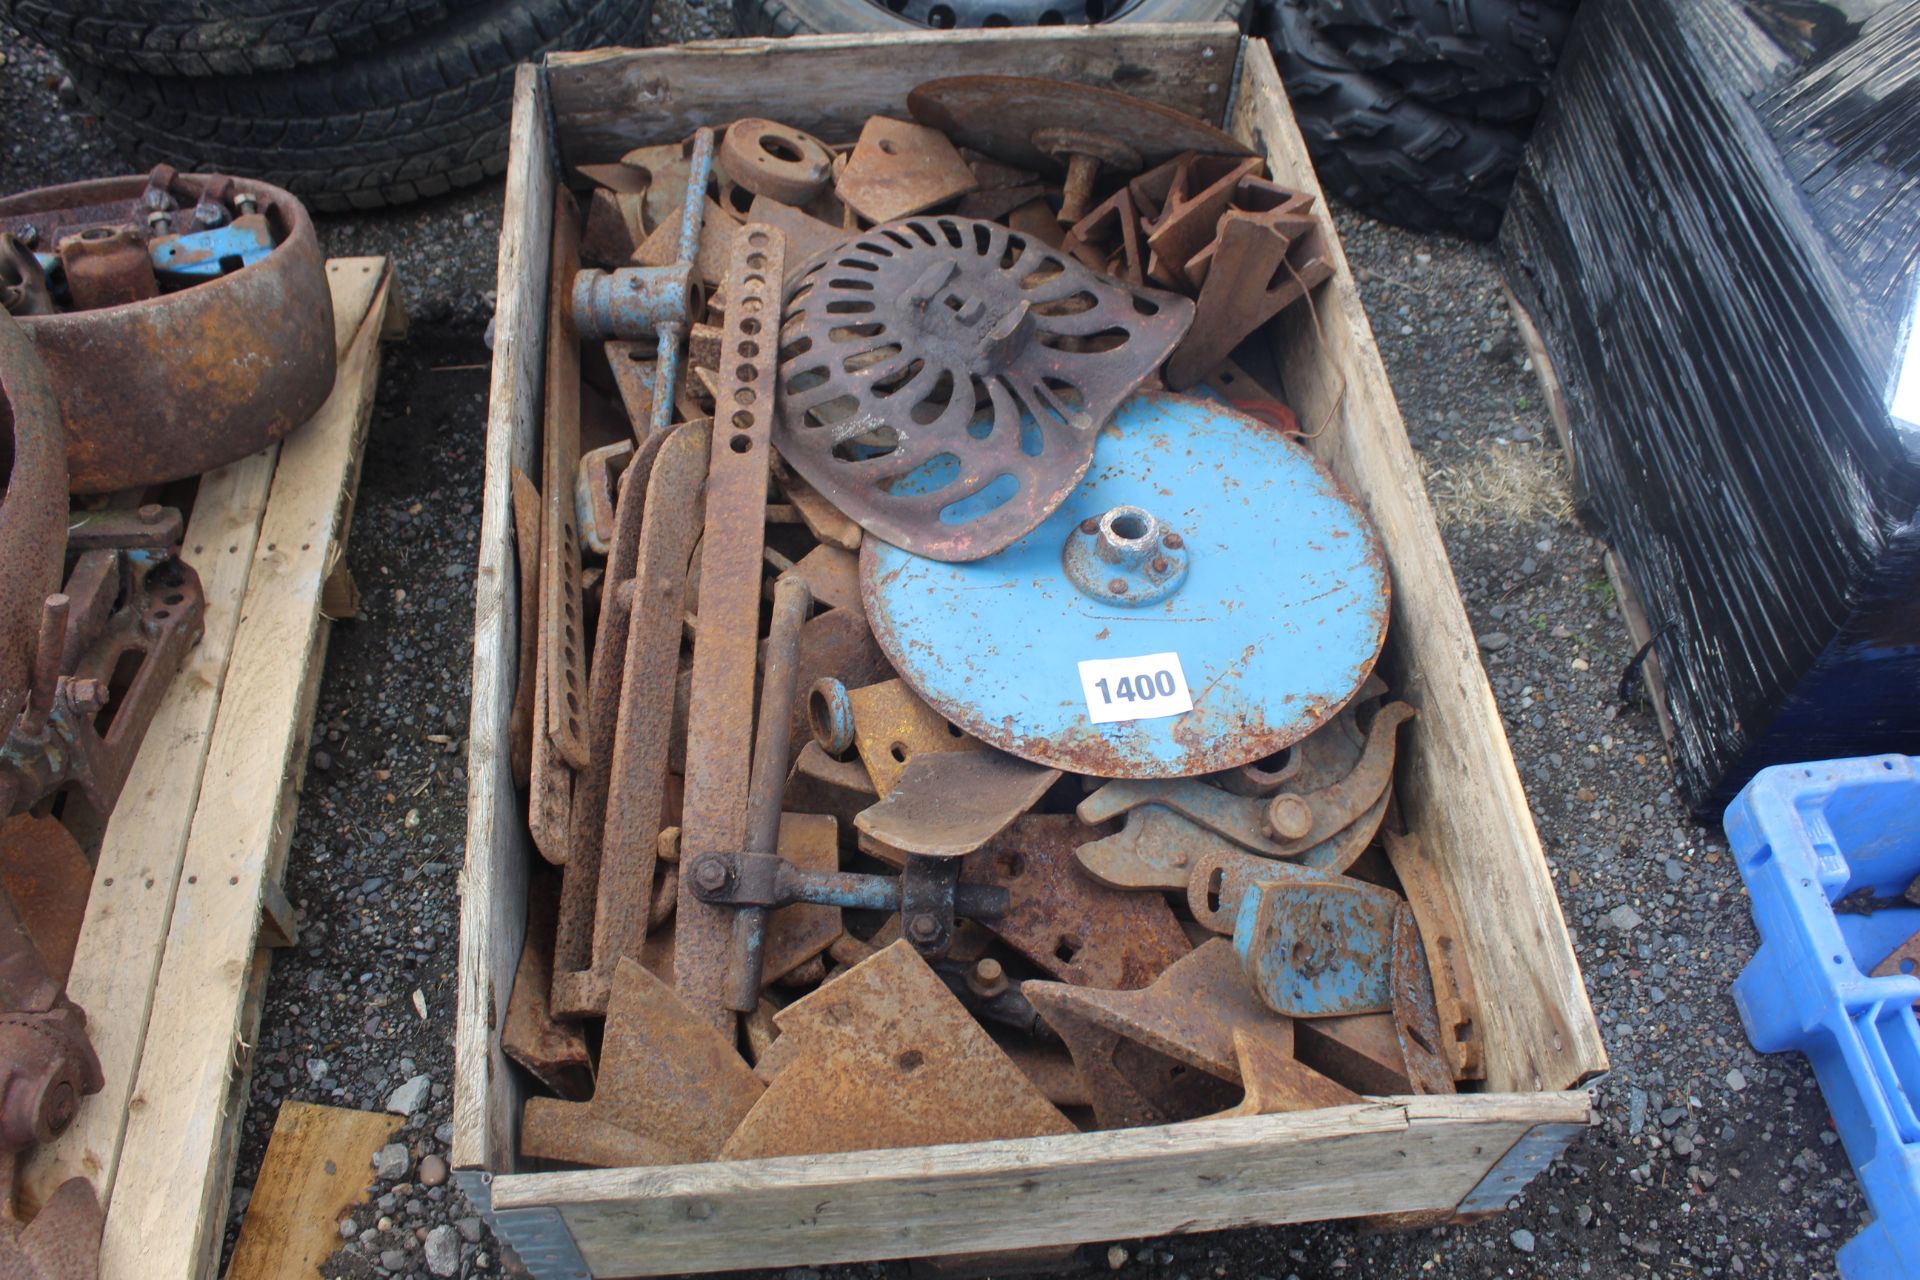 Various old plough spares. V